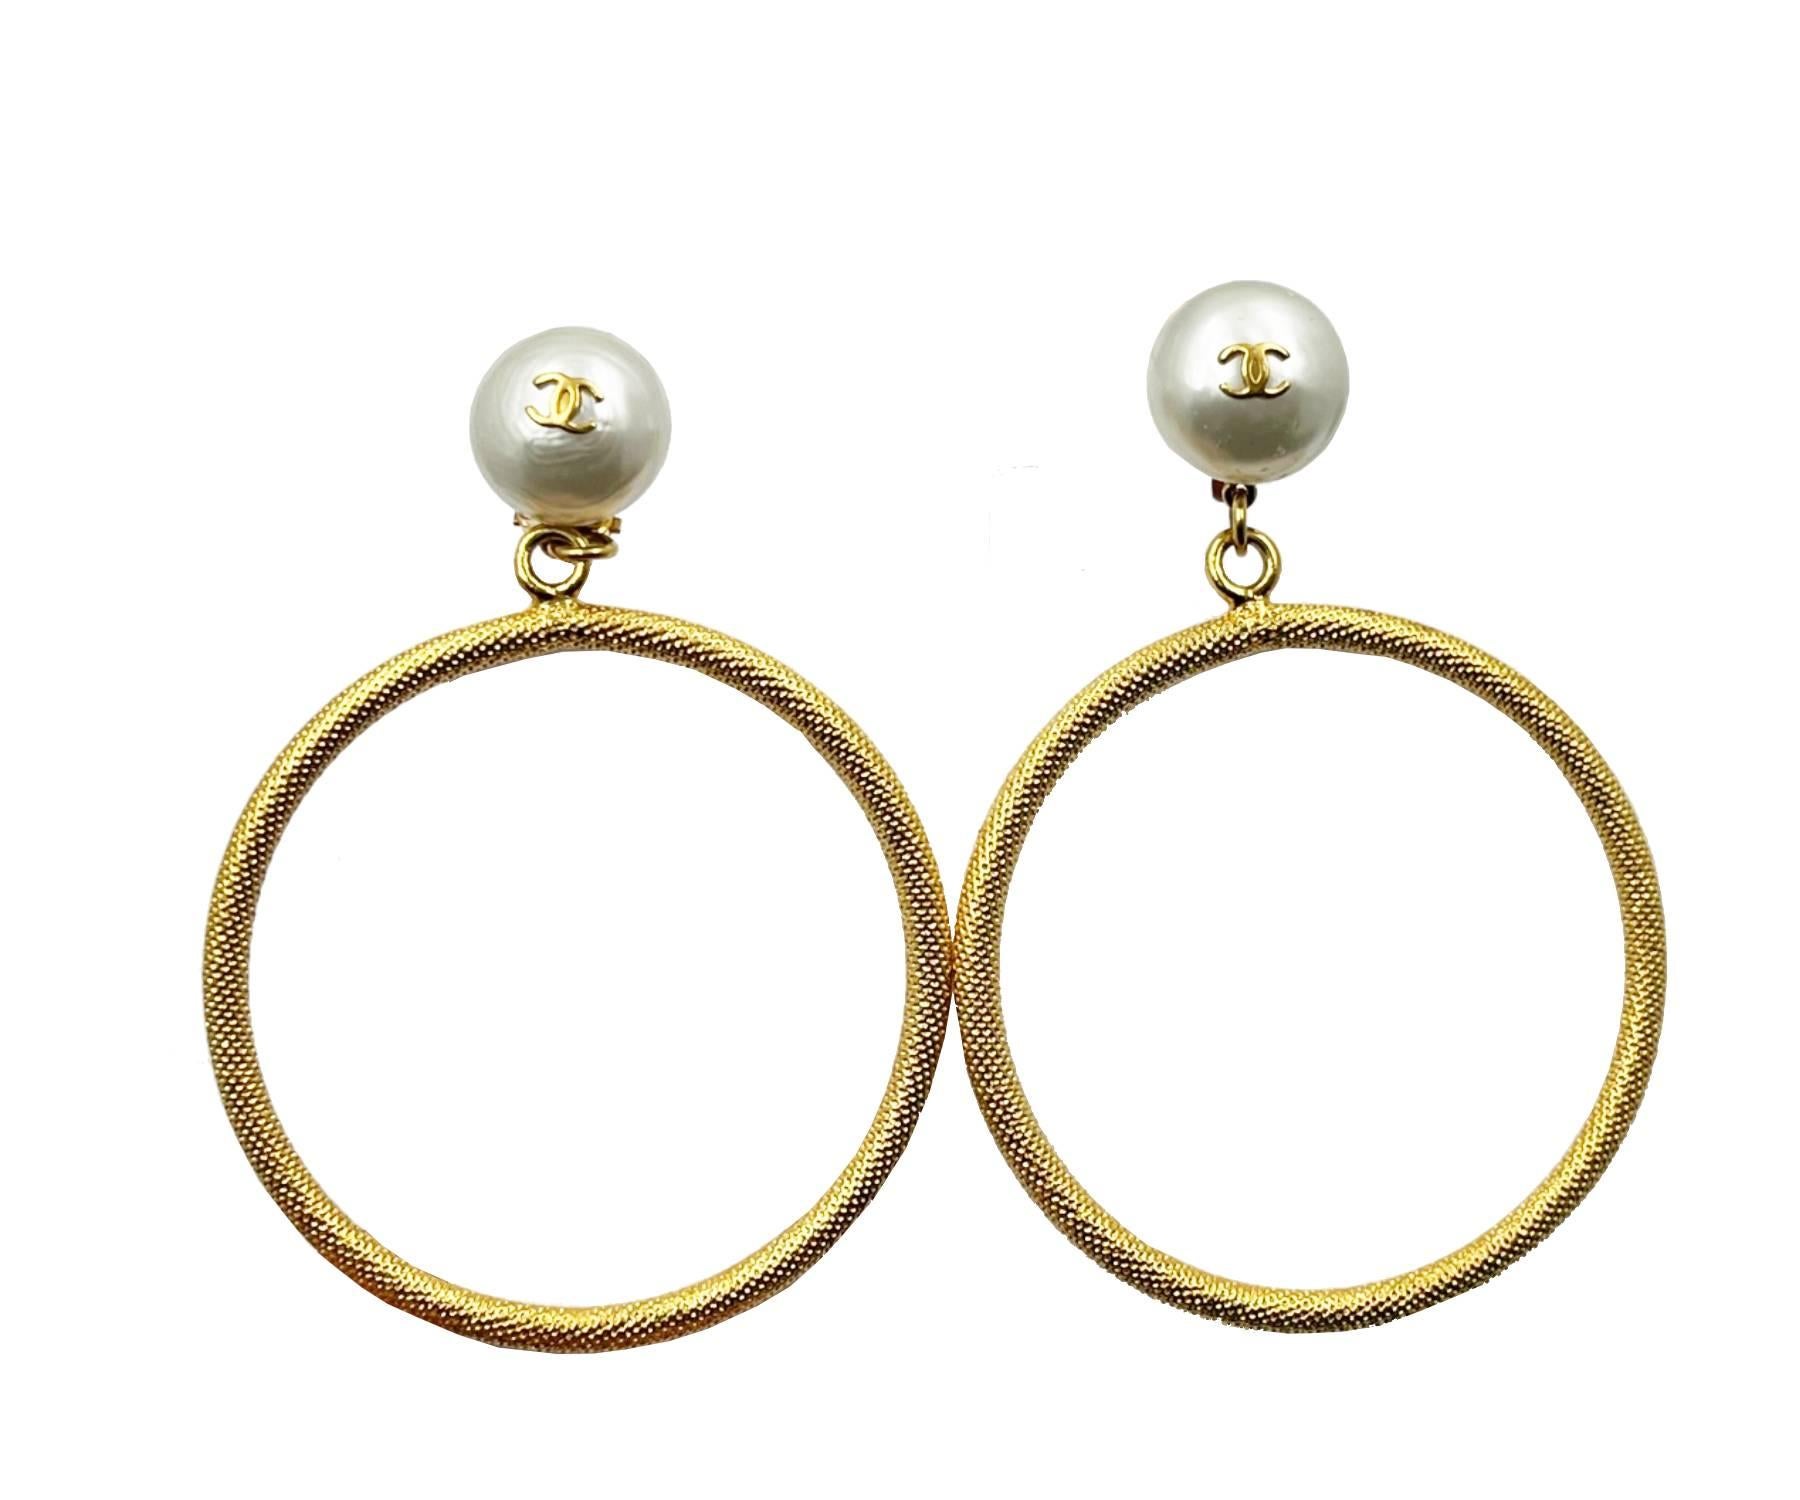 Chanel Vintage Rare Gold Plated CC Pearl Large Hoop Dangle Clip on Earrings

*Marked 96
*Made in France
* Comes with the original box

-It is approximately 3